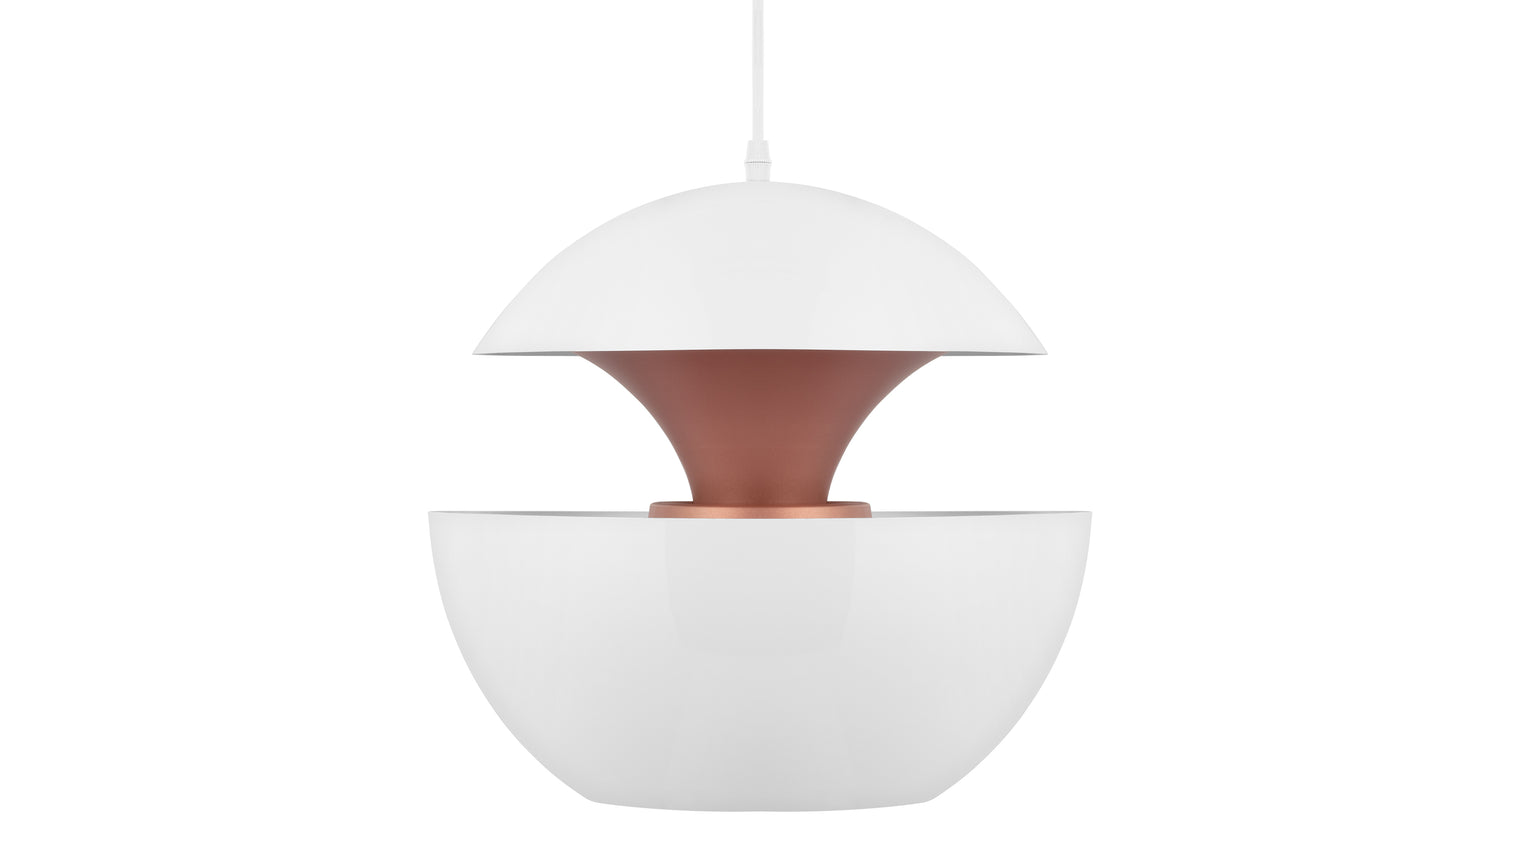 Retro Chic | Reminiscent of the iconic designs that emerged during the 1970s, the Omena Pendant Light captures the essence of timeless style. Its minimalist yet sophisticated appearance reflects the modernist sensibilities that defined design trends of the time.
